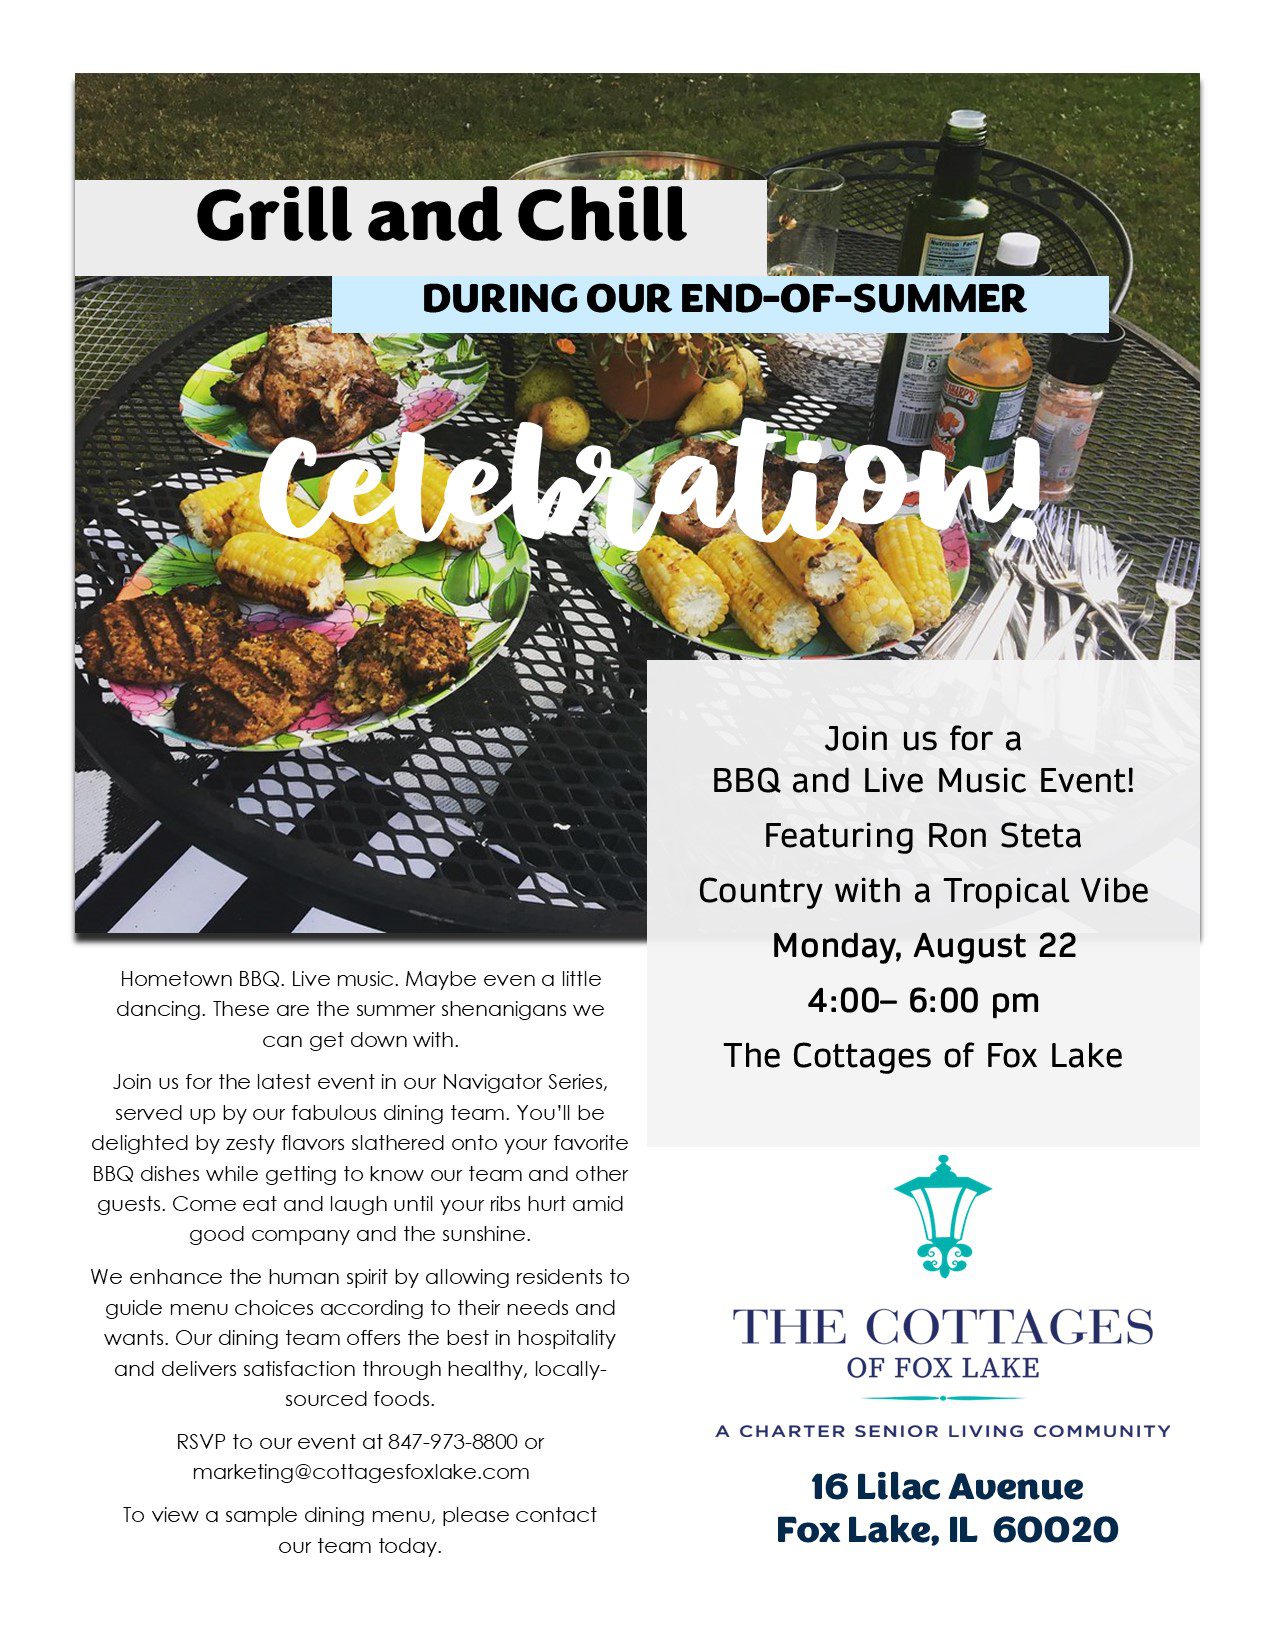 Cottages of Fox Lake - Assisted Living and Memory Care - Grill and Chill